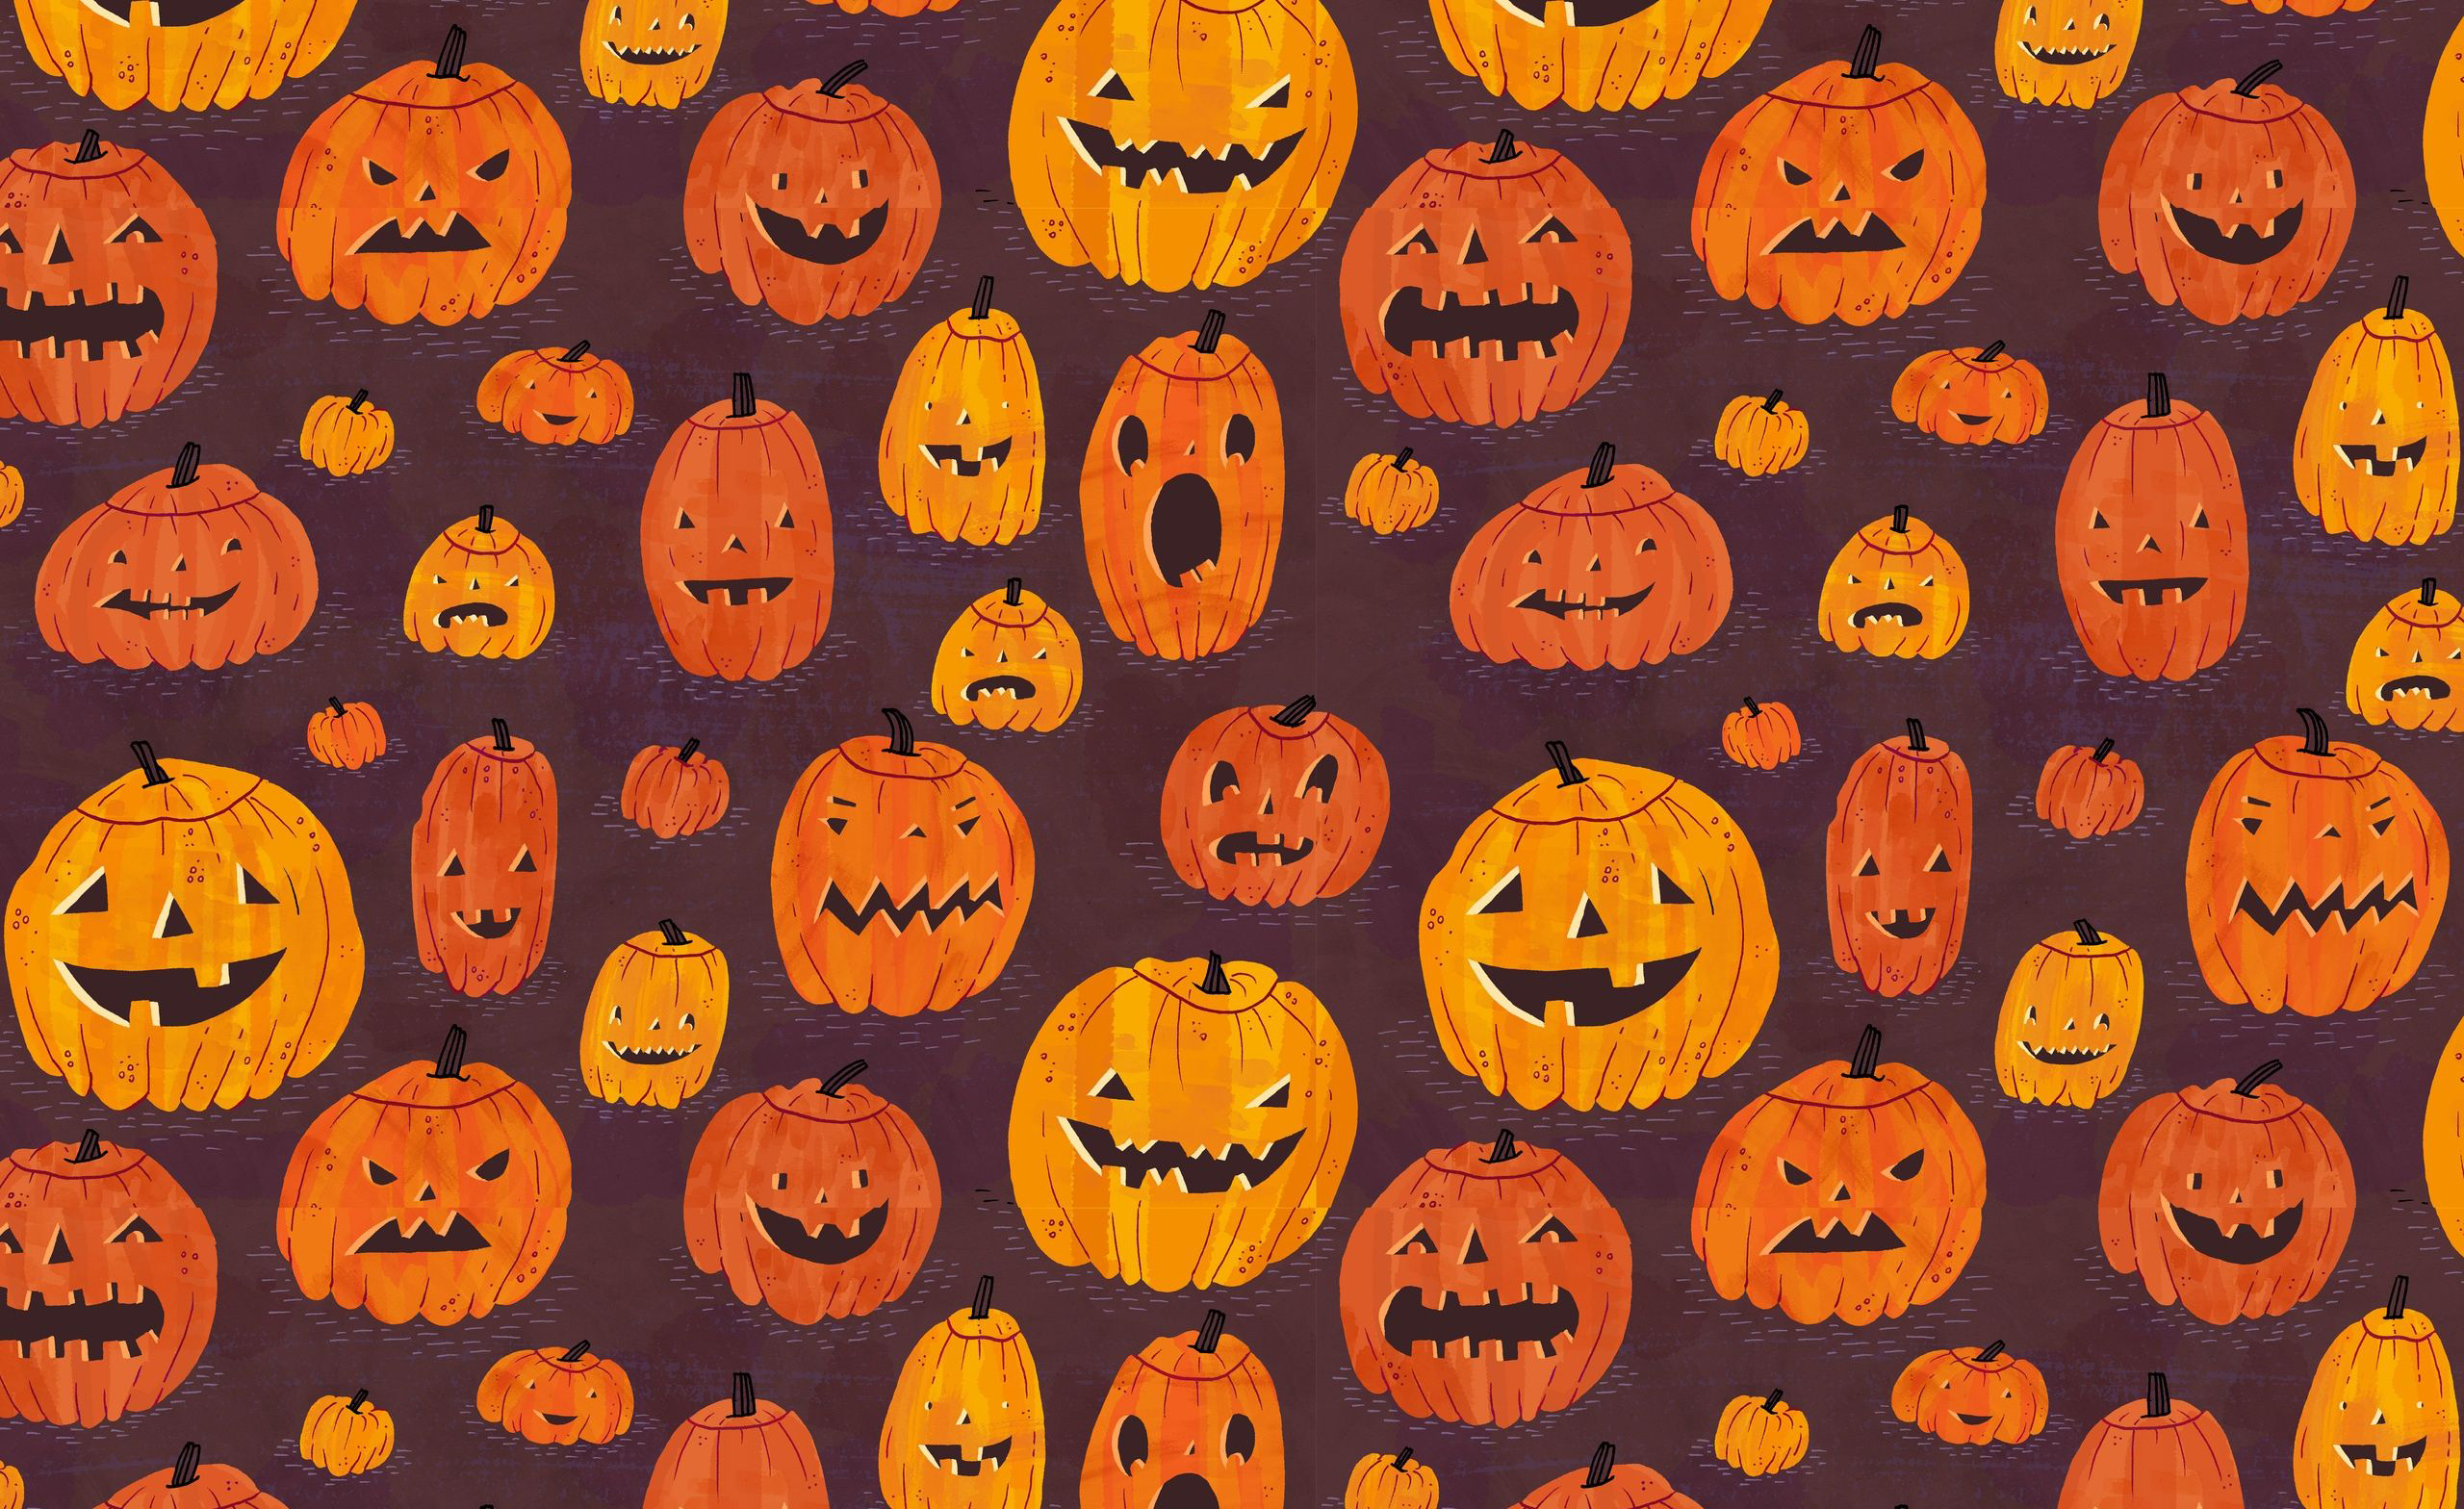 Aesthetic Halloween Wallpapers for Your Phone and Computer